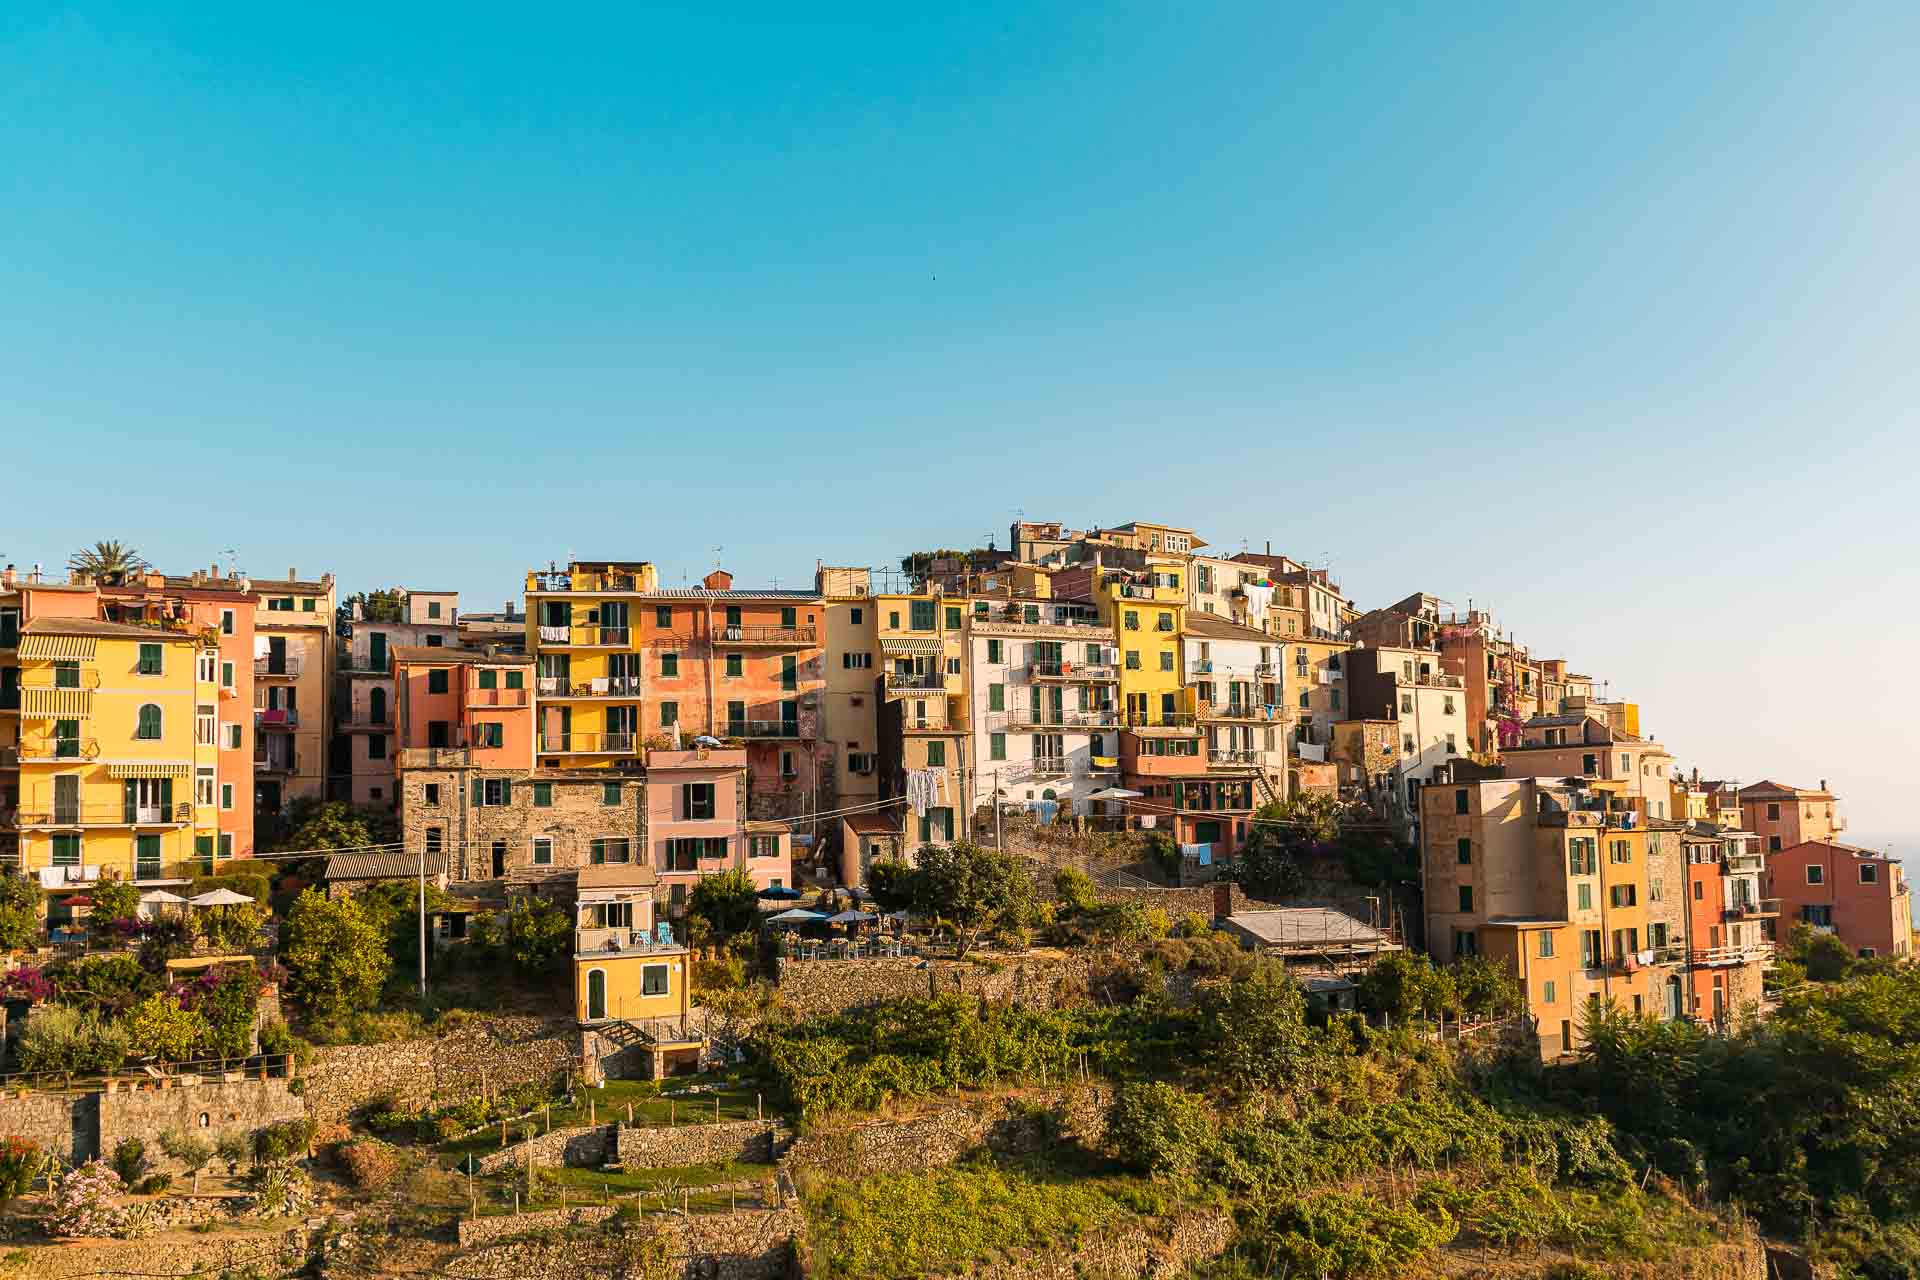 The houses on top of the mountain in Corniglia, one of the Cinque Terre